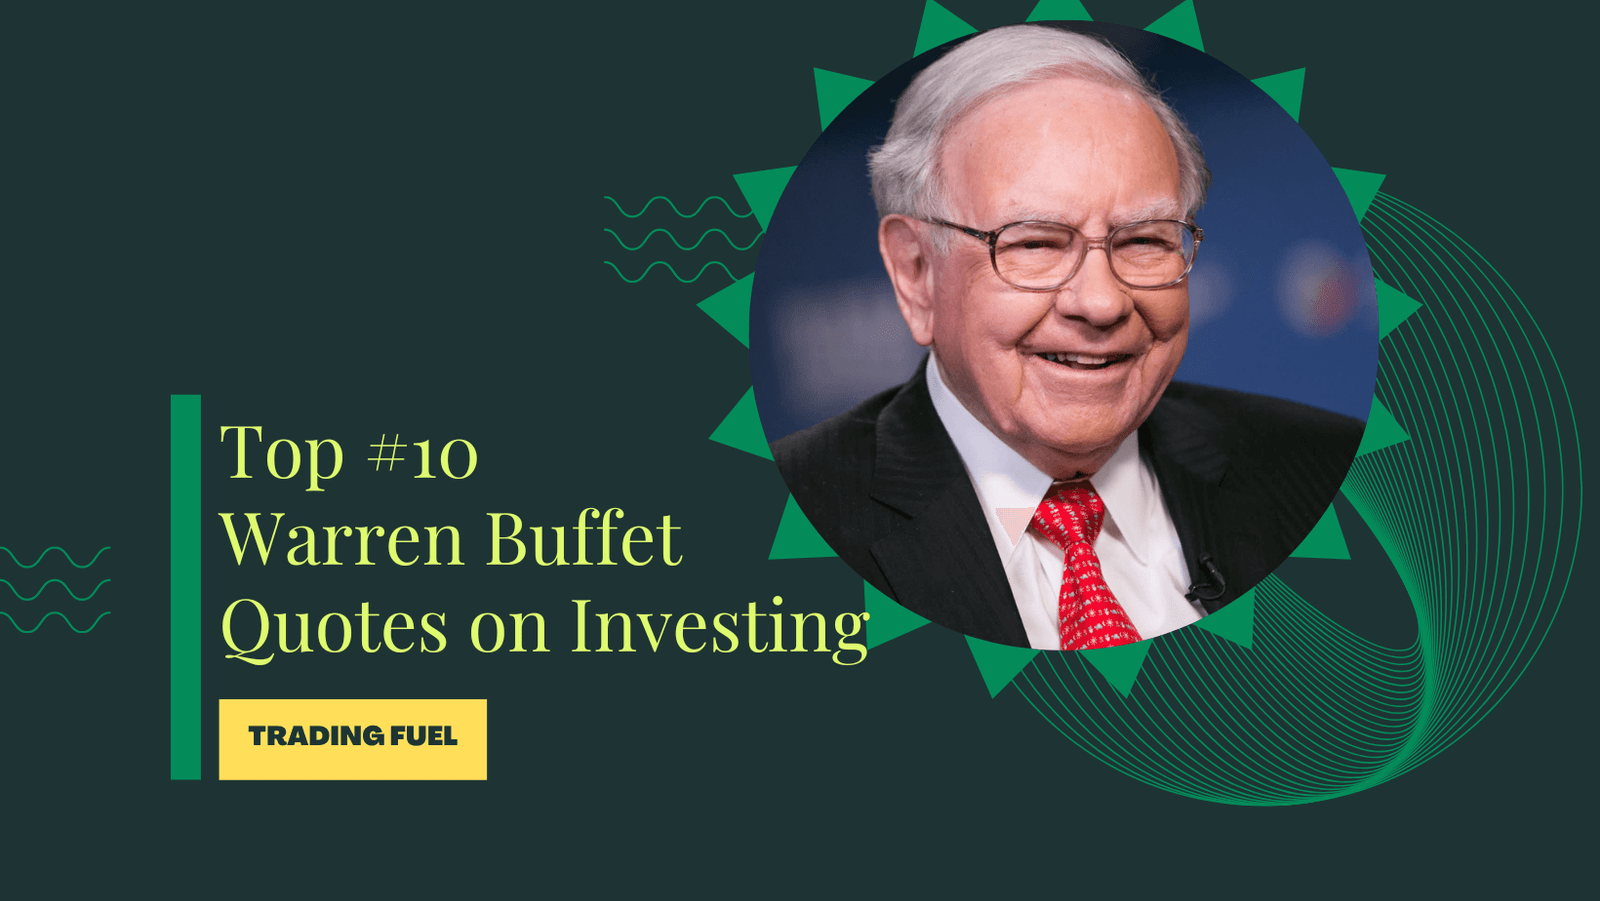 Top 10 Warren Buffet Quotes on Investing